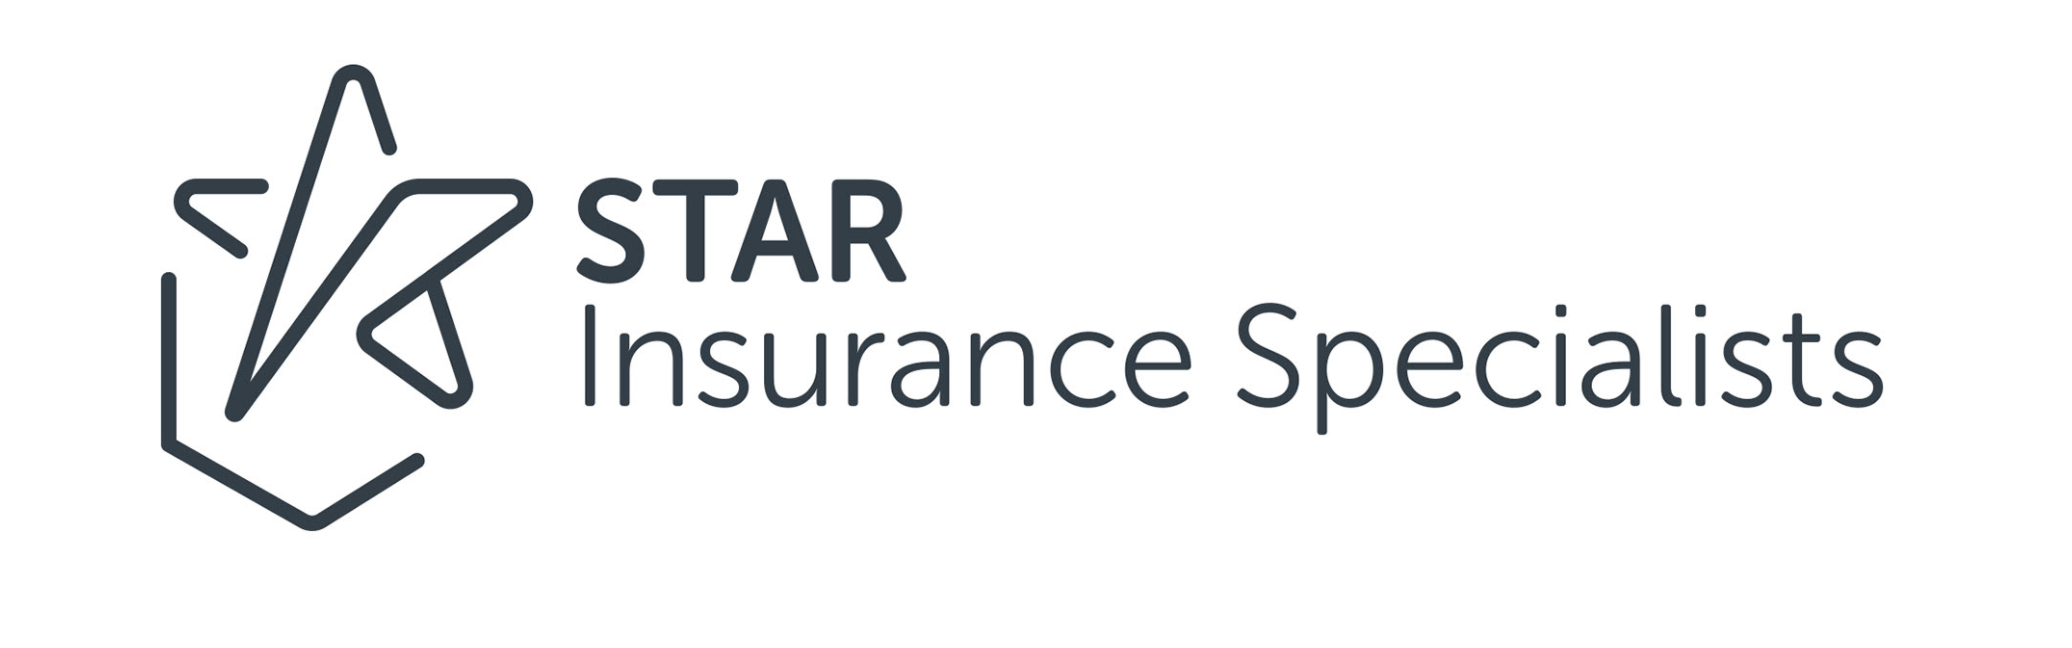 Star Insurance Specialists Naming And Brand